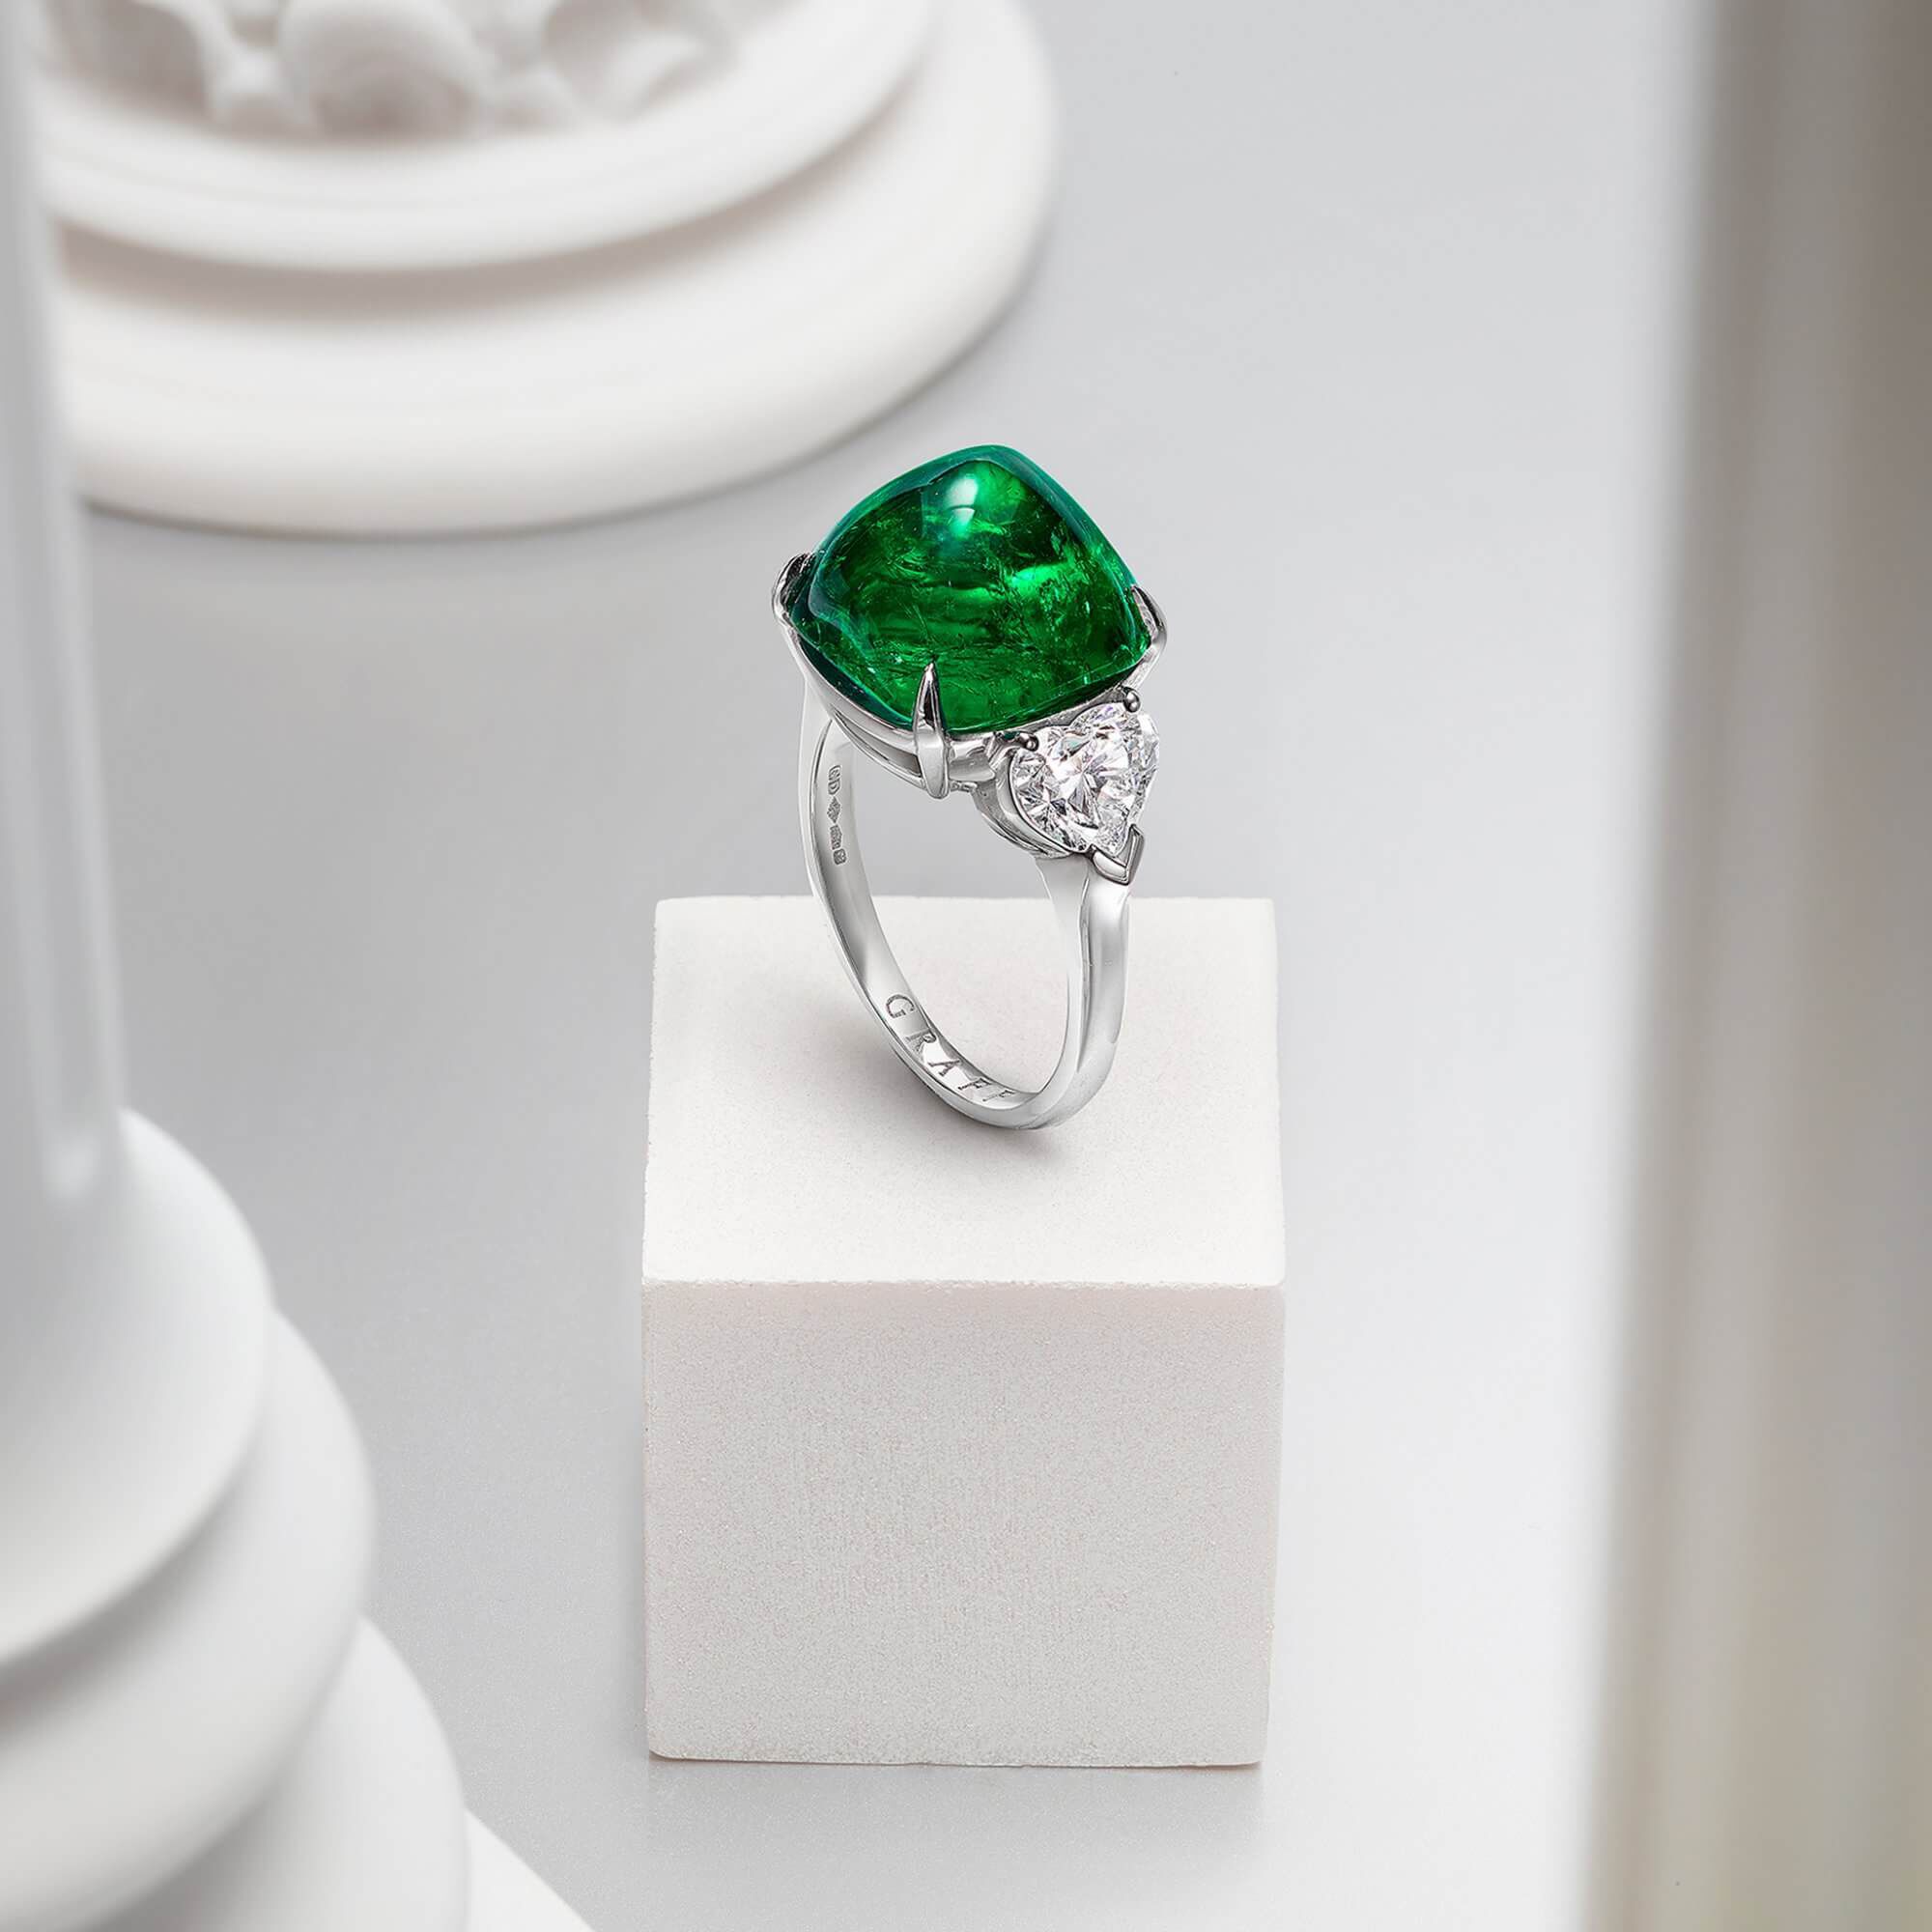 Graff Cabochon Emerald Promise High Jewellery Ring With White Heart Shape Diamond Shoulders inside a Gallery